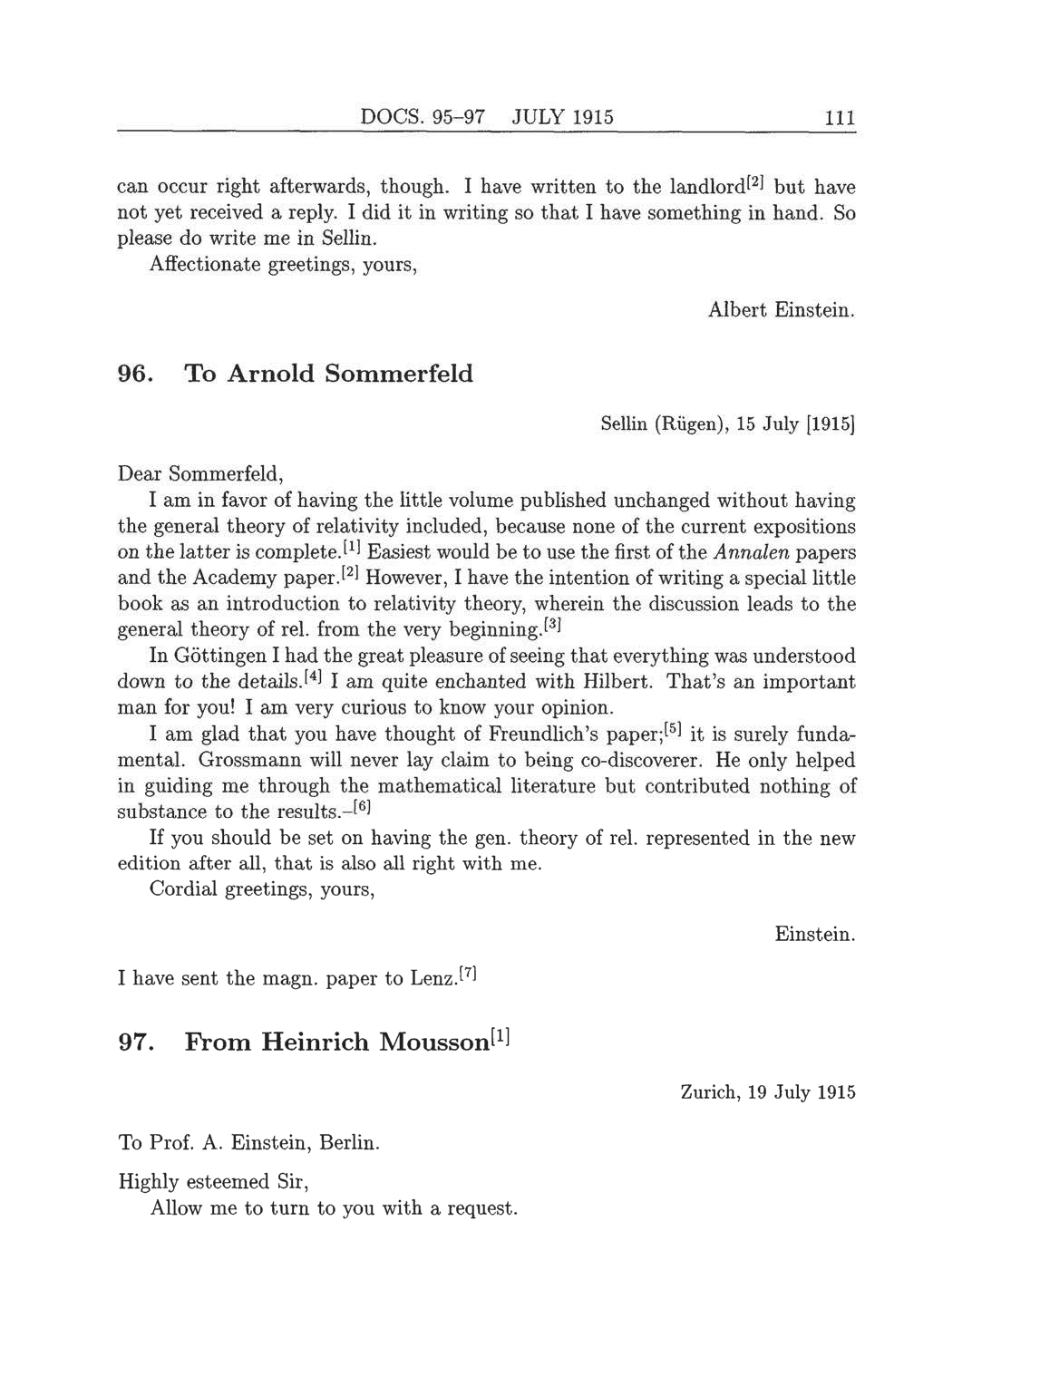 Volume 8: The Berlin Years: Correspondence, 1914-1918 (English translation supplement) page 111